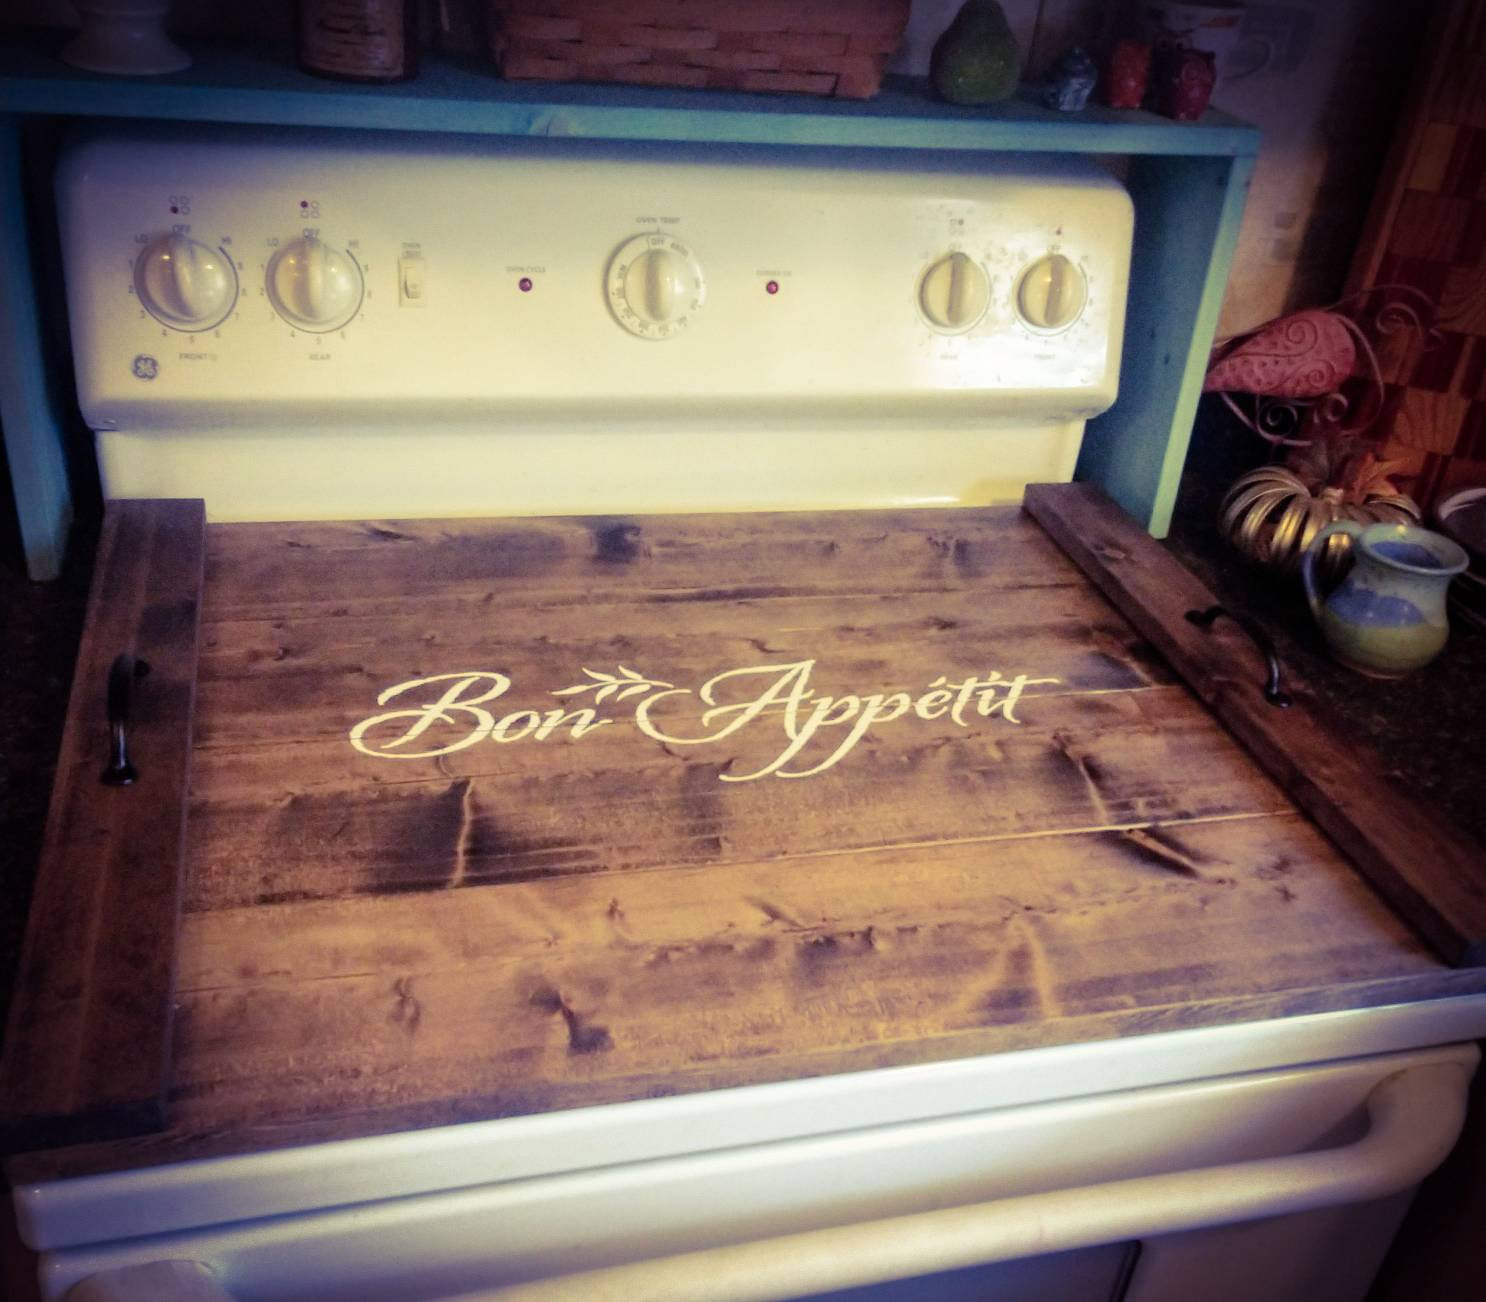 Stove Cover / Noodle Board / Stove Tray / Hardwood Stove Cover 